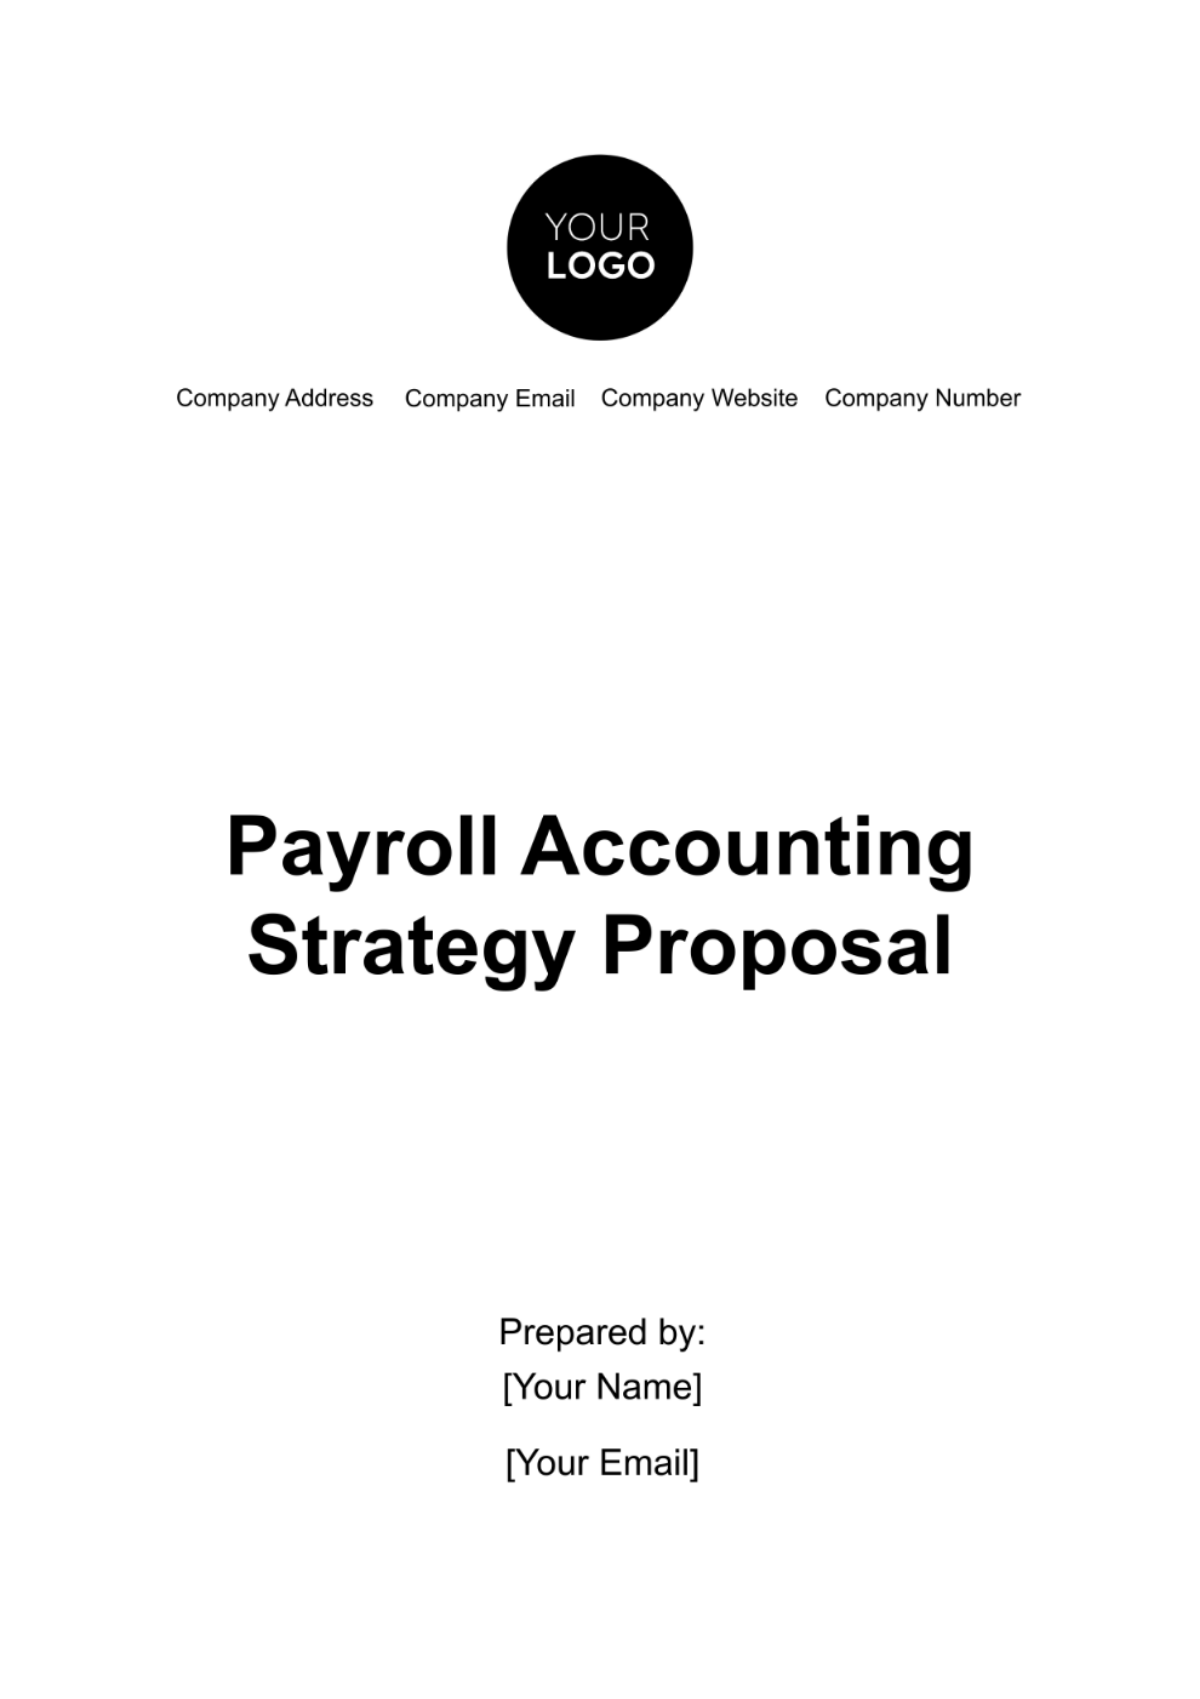 Payroll Accounting Strategy Proposal Template